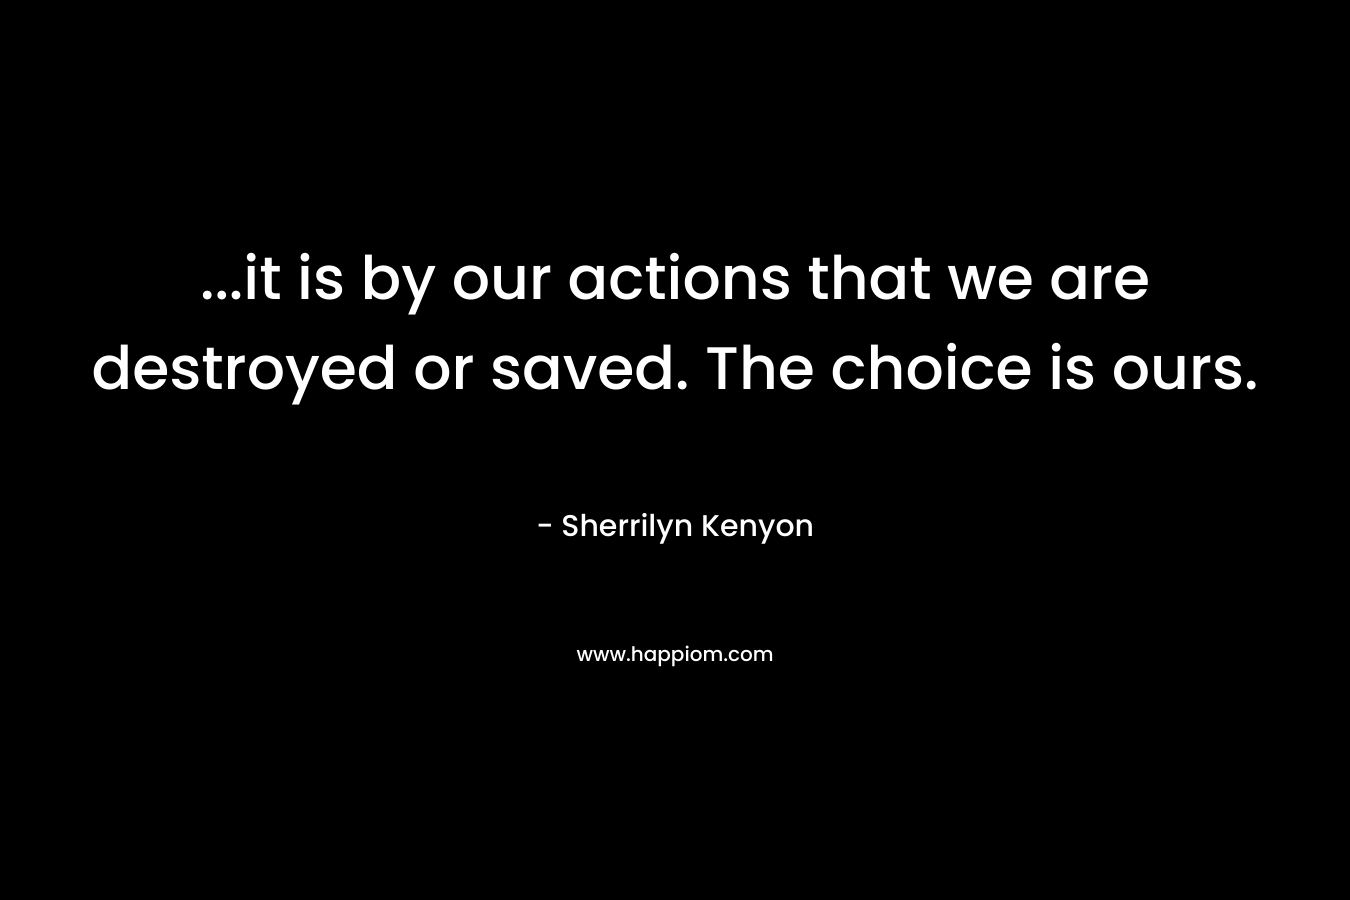 …it is by our actions that we are destroyed or saved. The choice is ours. – Sherrilyn Kenyon